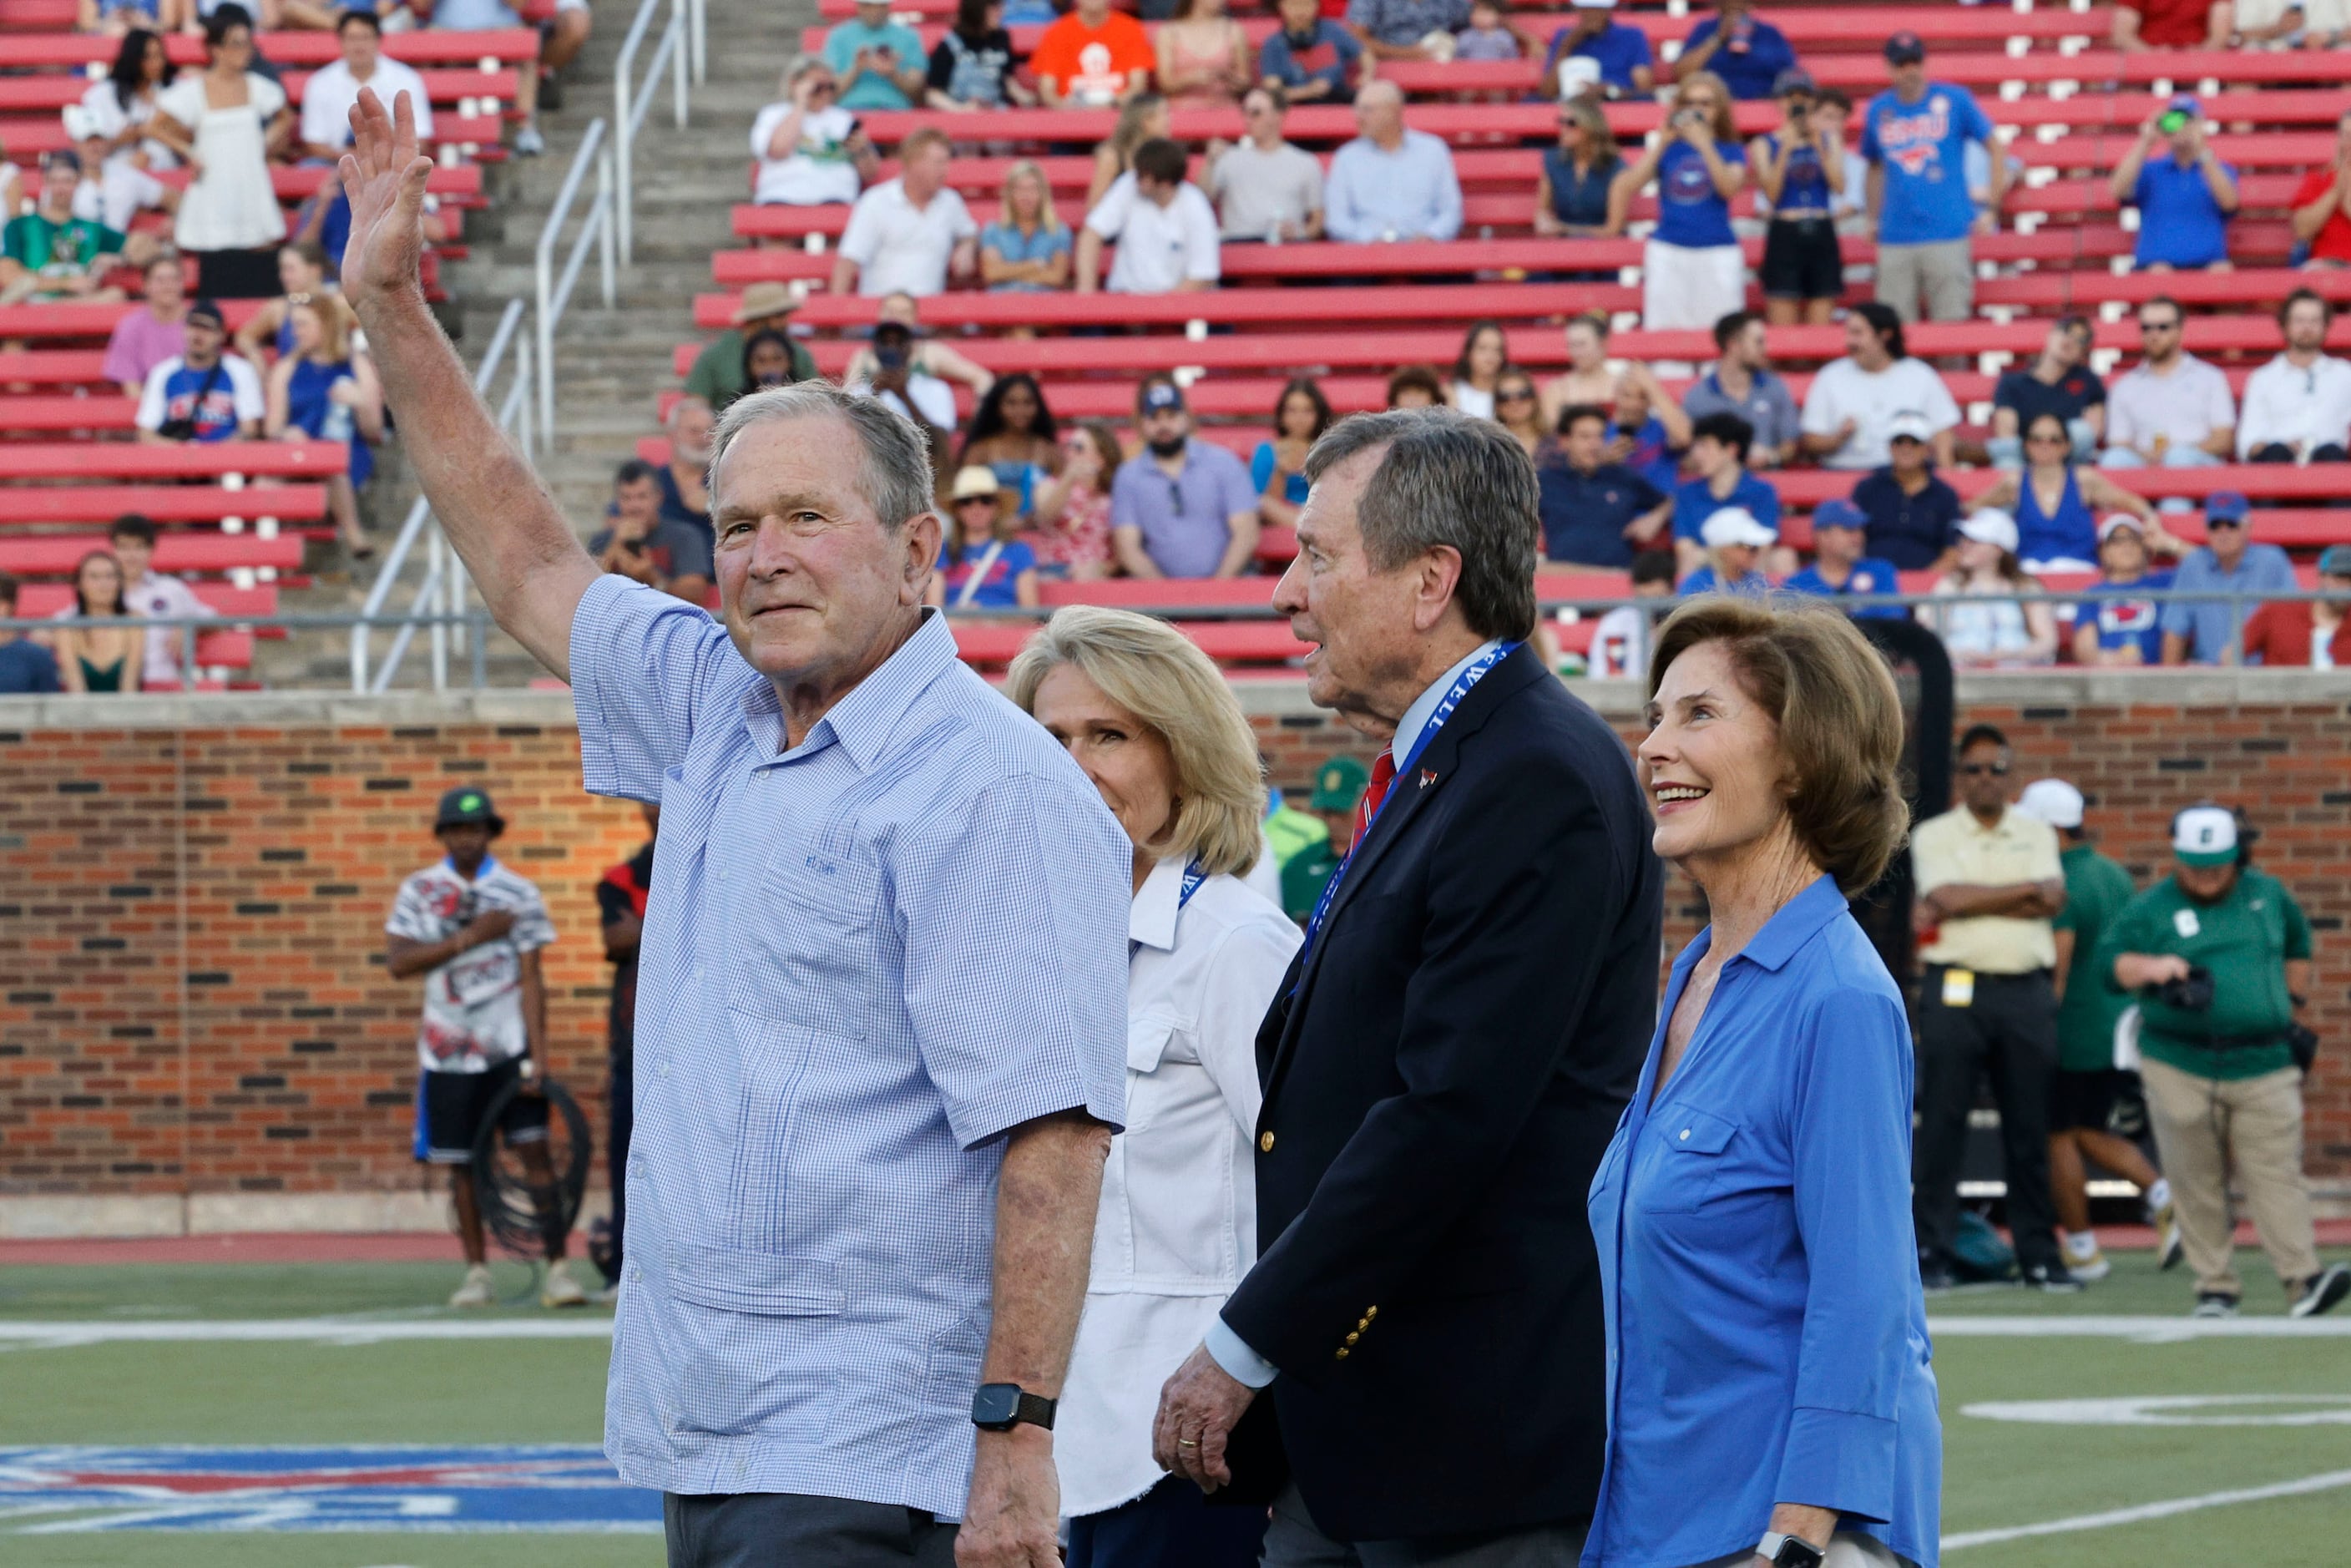 Photos George W And Laura Bush Take Part In Coin Toss Before Smus Aac Opener Vs Charlotte 